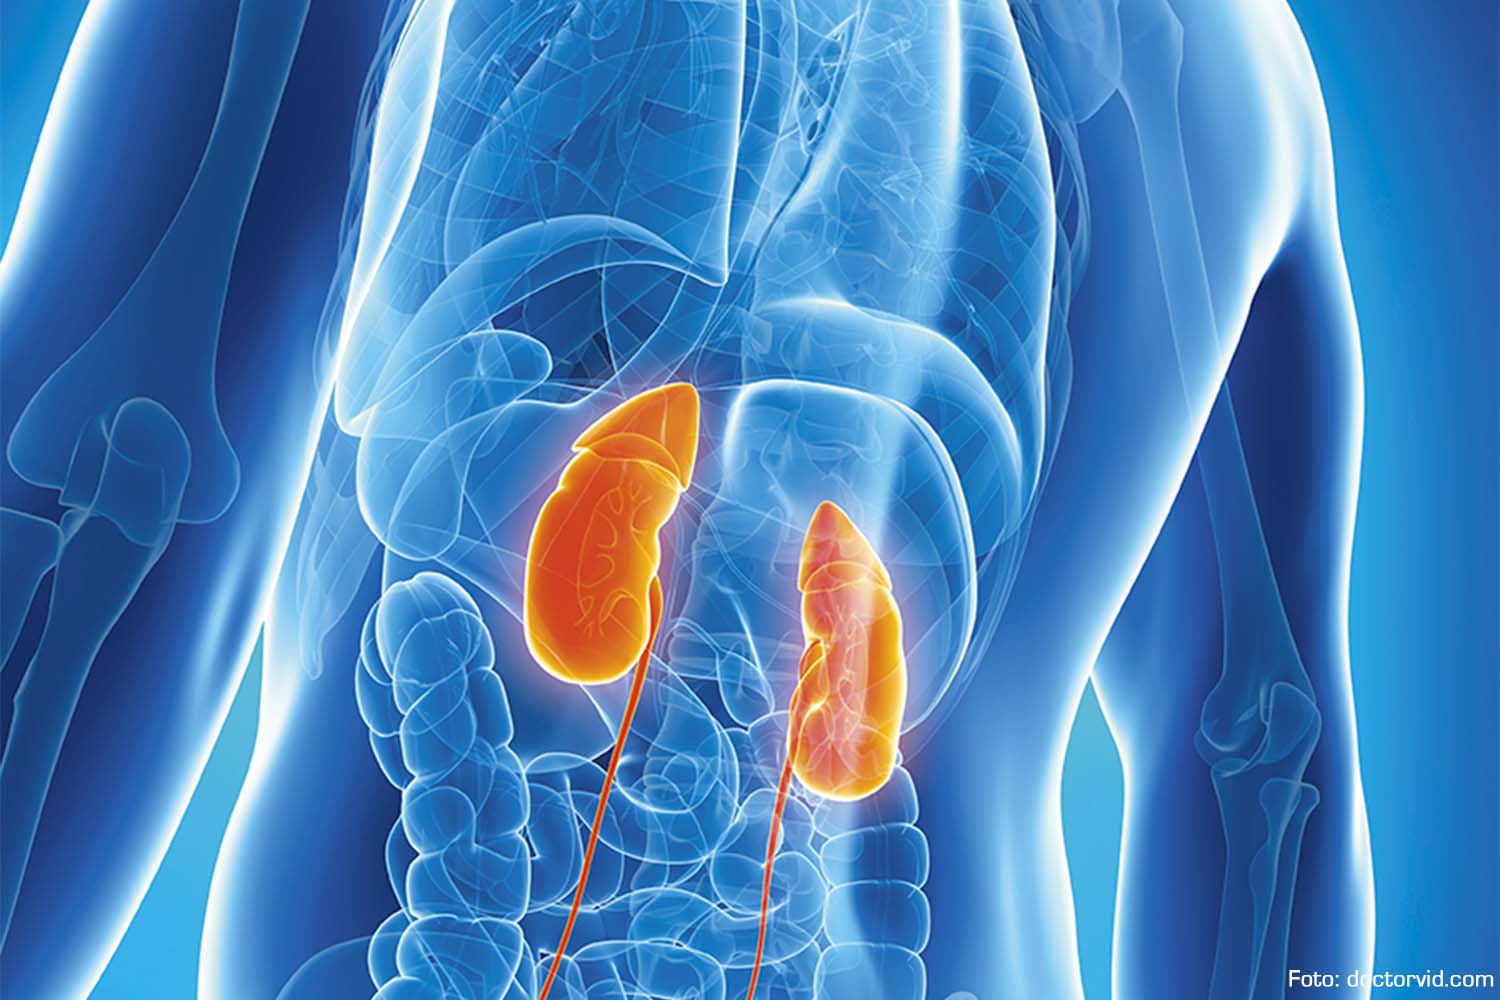 Renal Biomarkers Market Is Estimated To Witness High Growth Owing To Increasing Prevalence of Chronic Kidney Diseases and Rising Adoption of Point-of-Care Testing